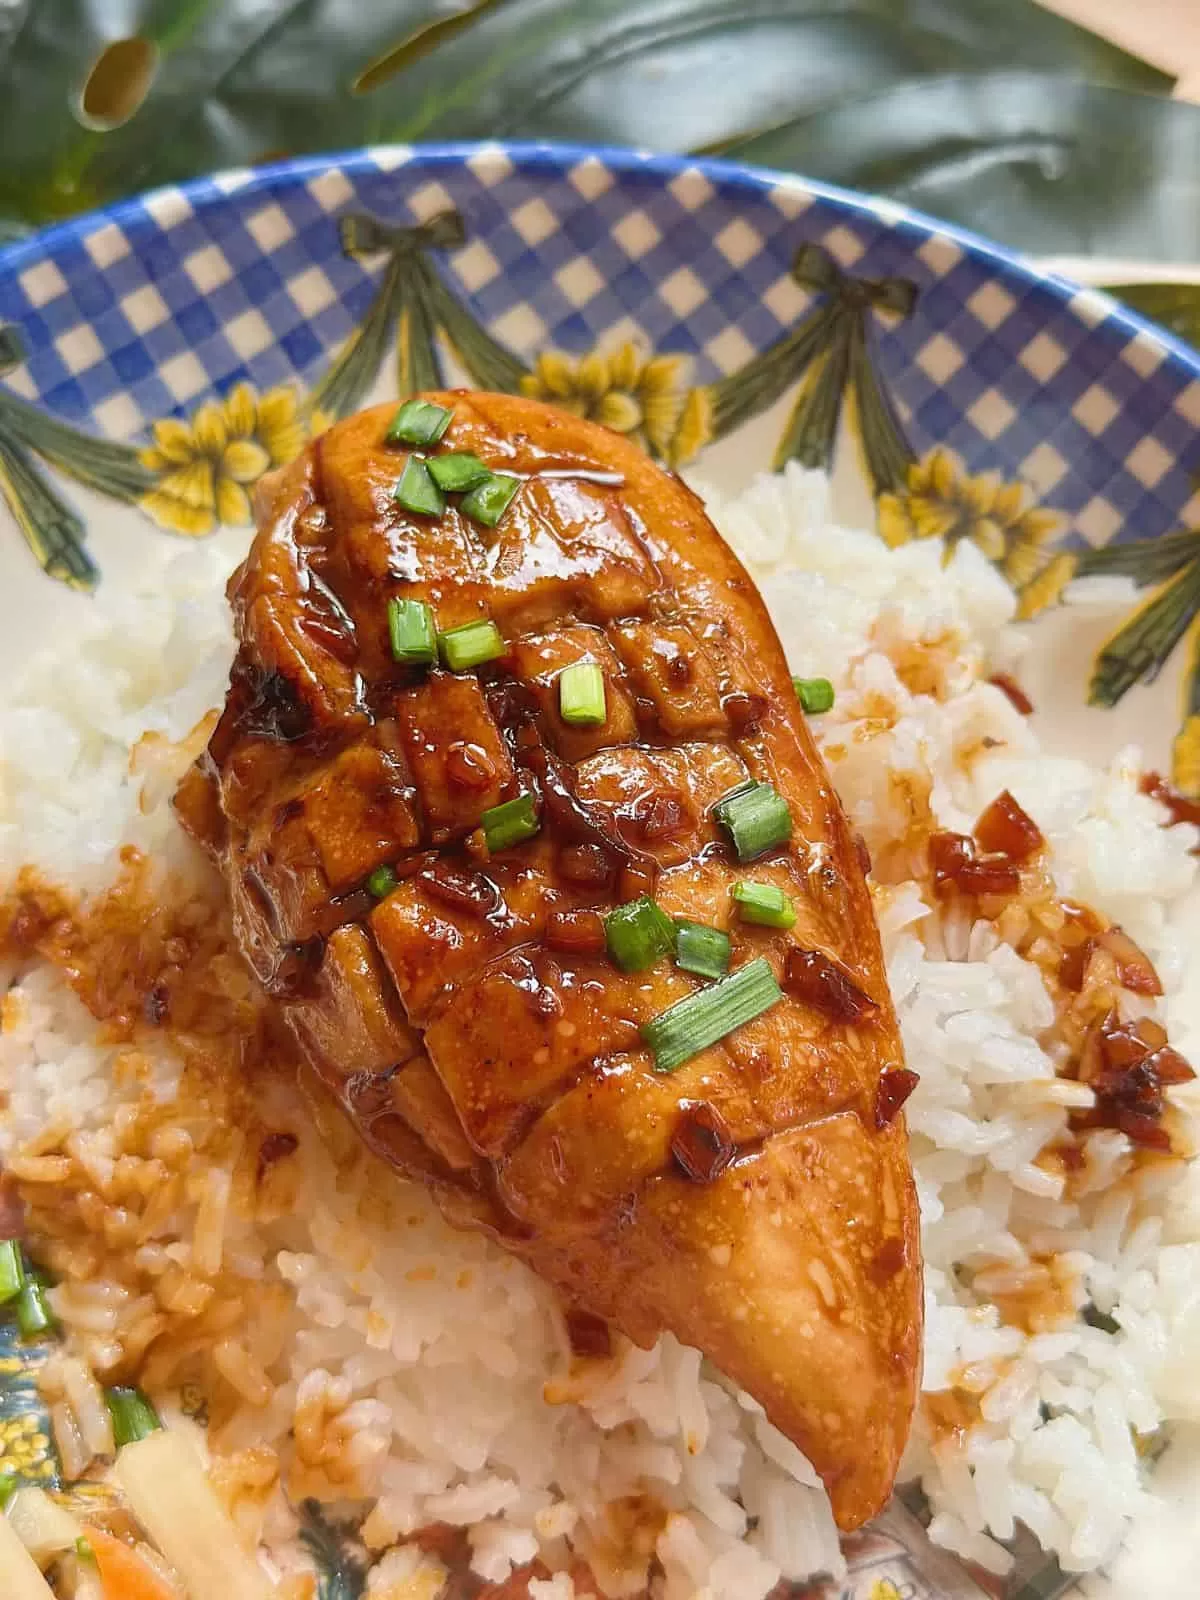 Flavorful Delights: Soy Garlic Chicken Recipe Revealed